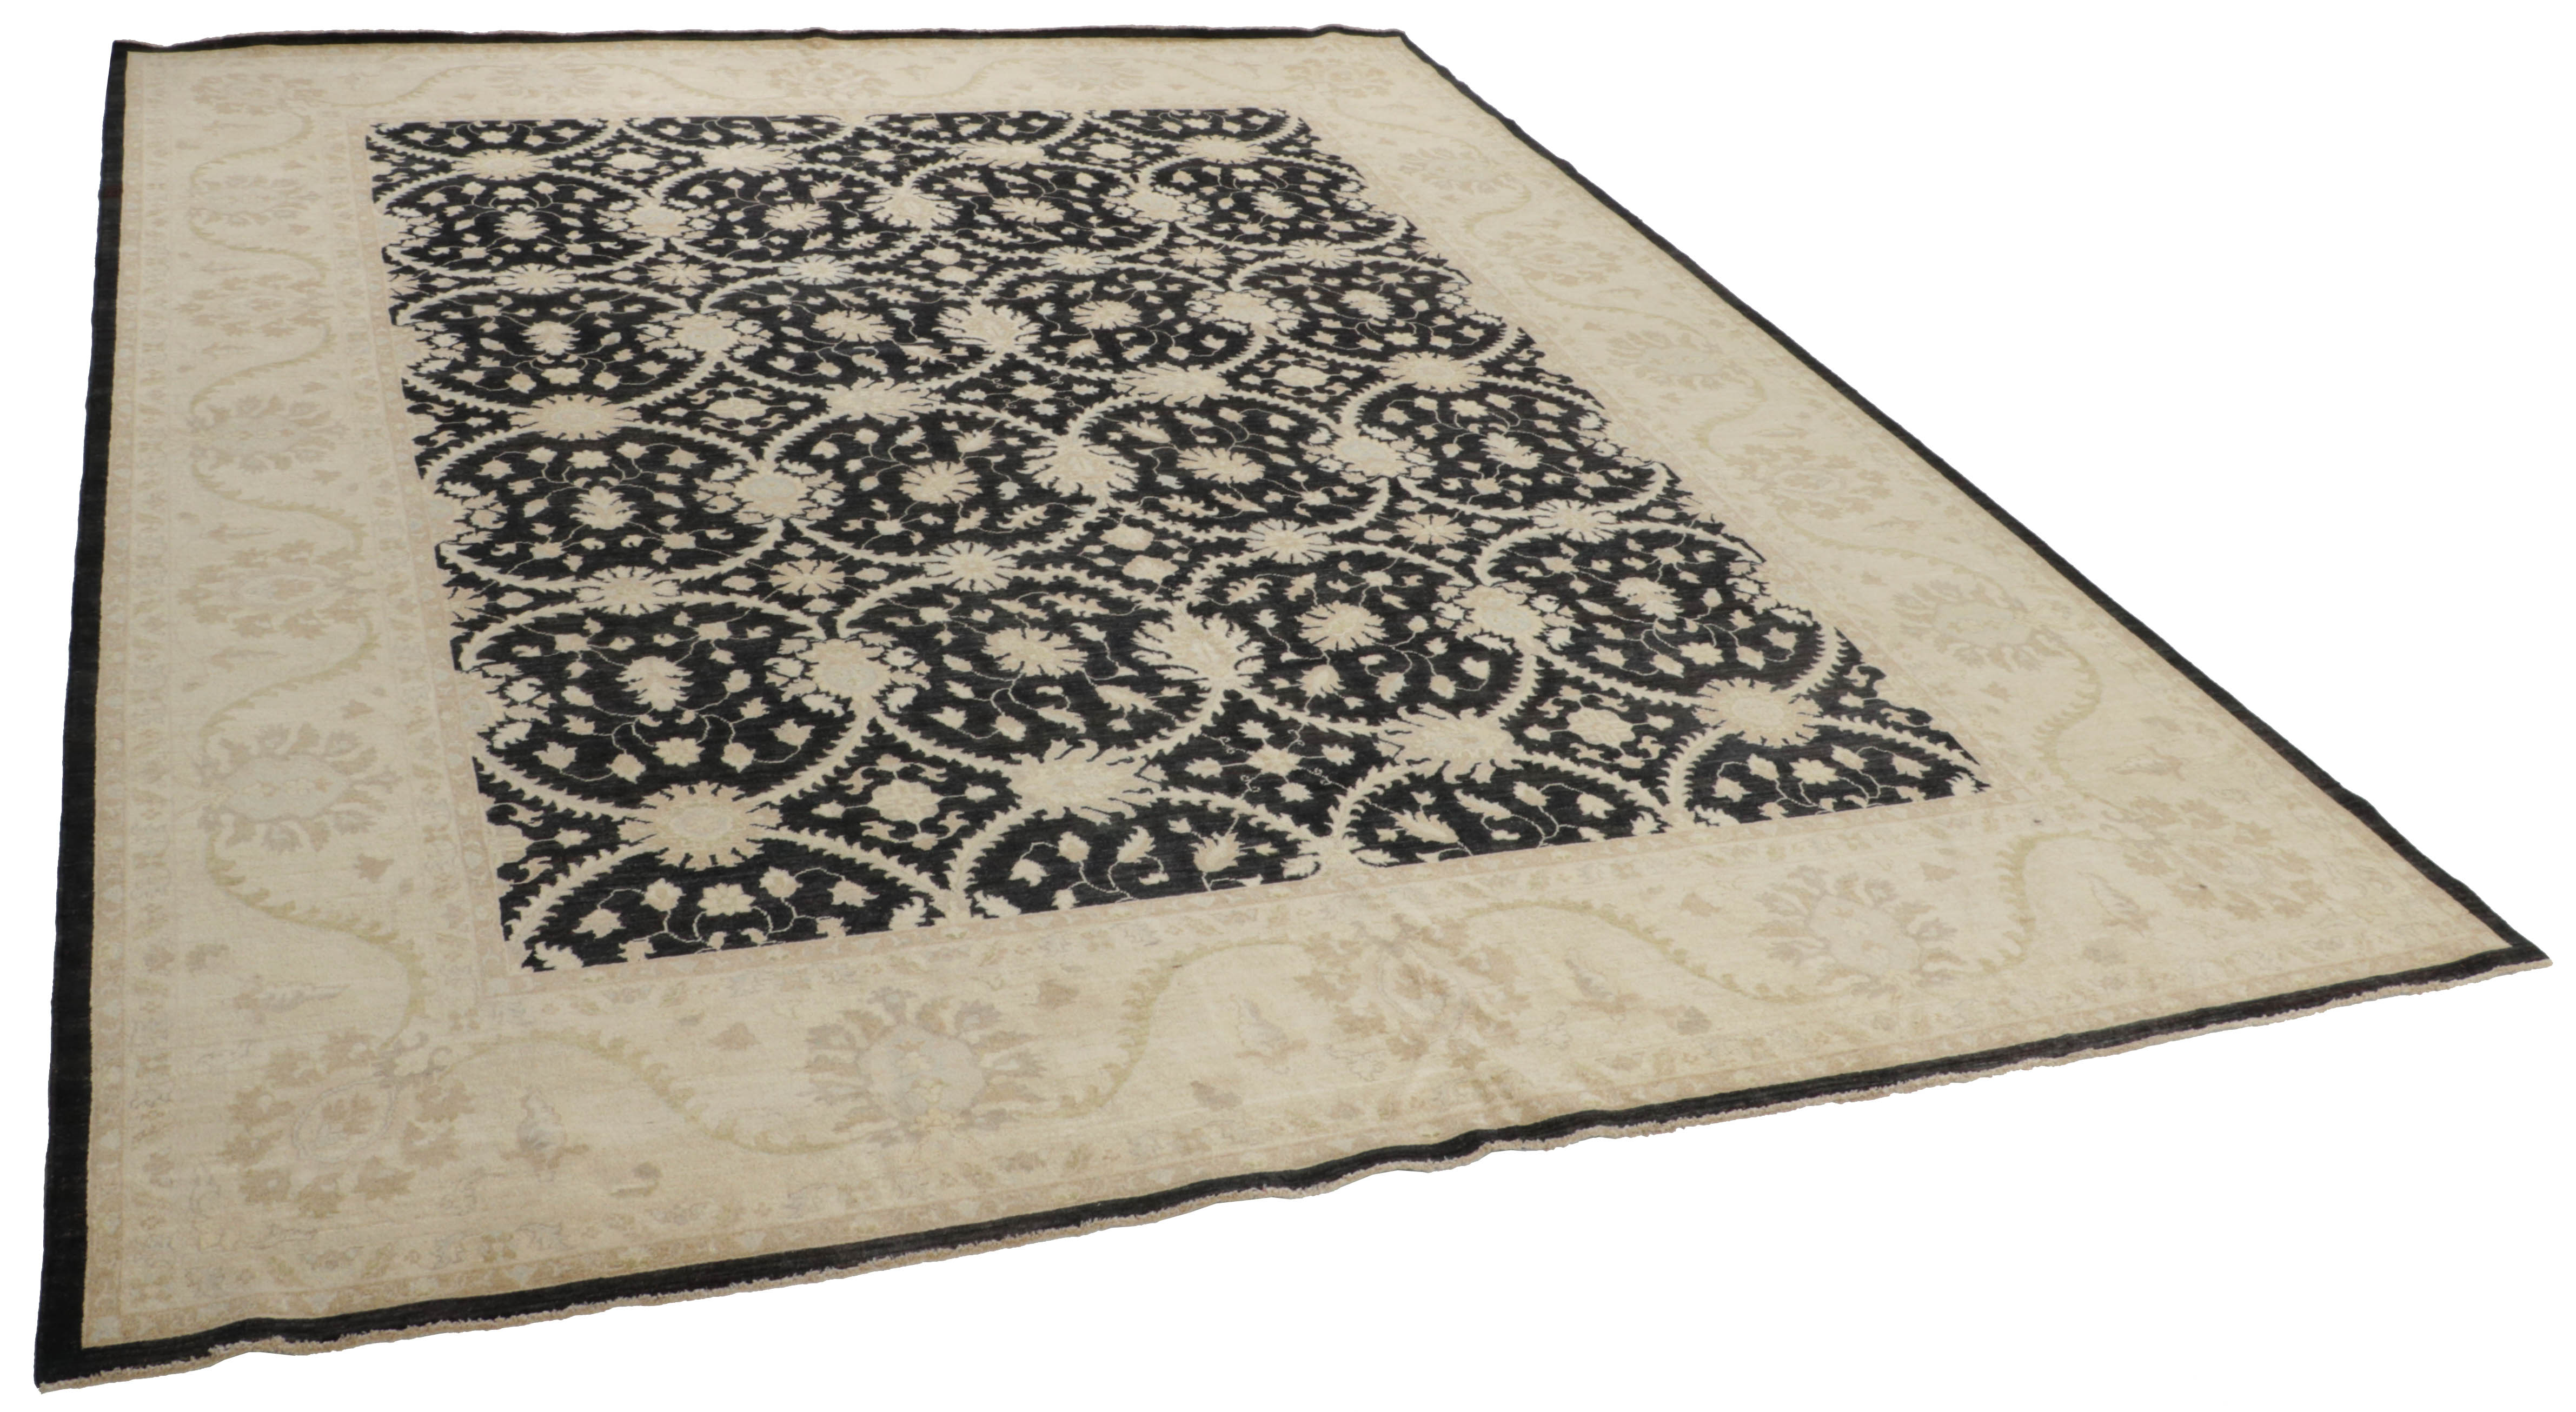 Authentic oriental rug with delicate floral pattern in beige and black